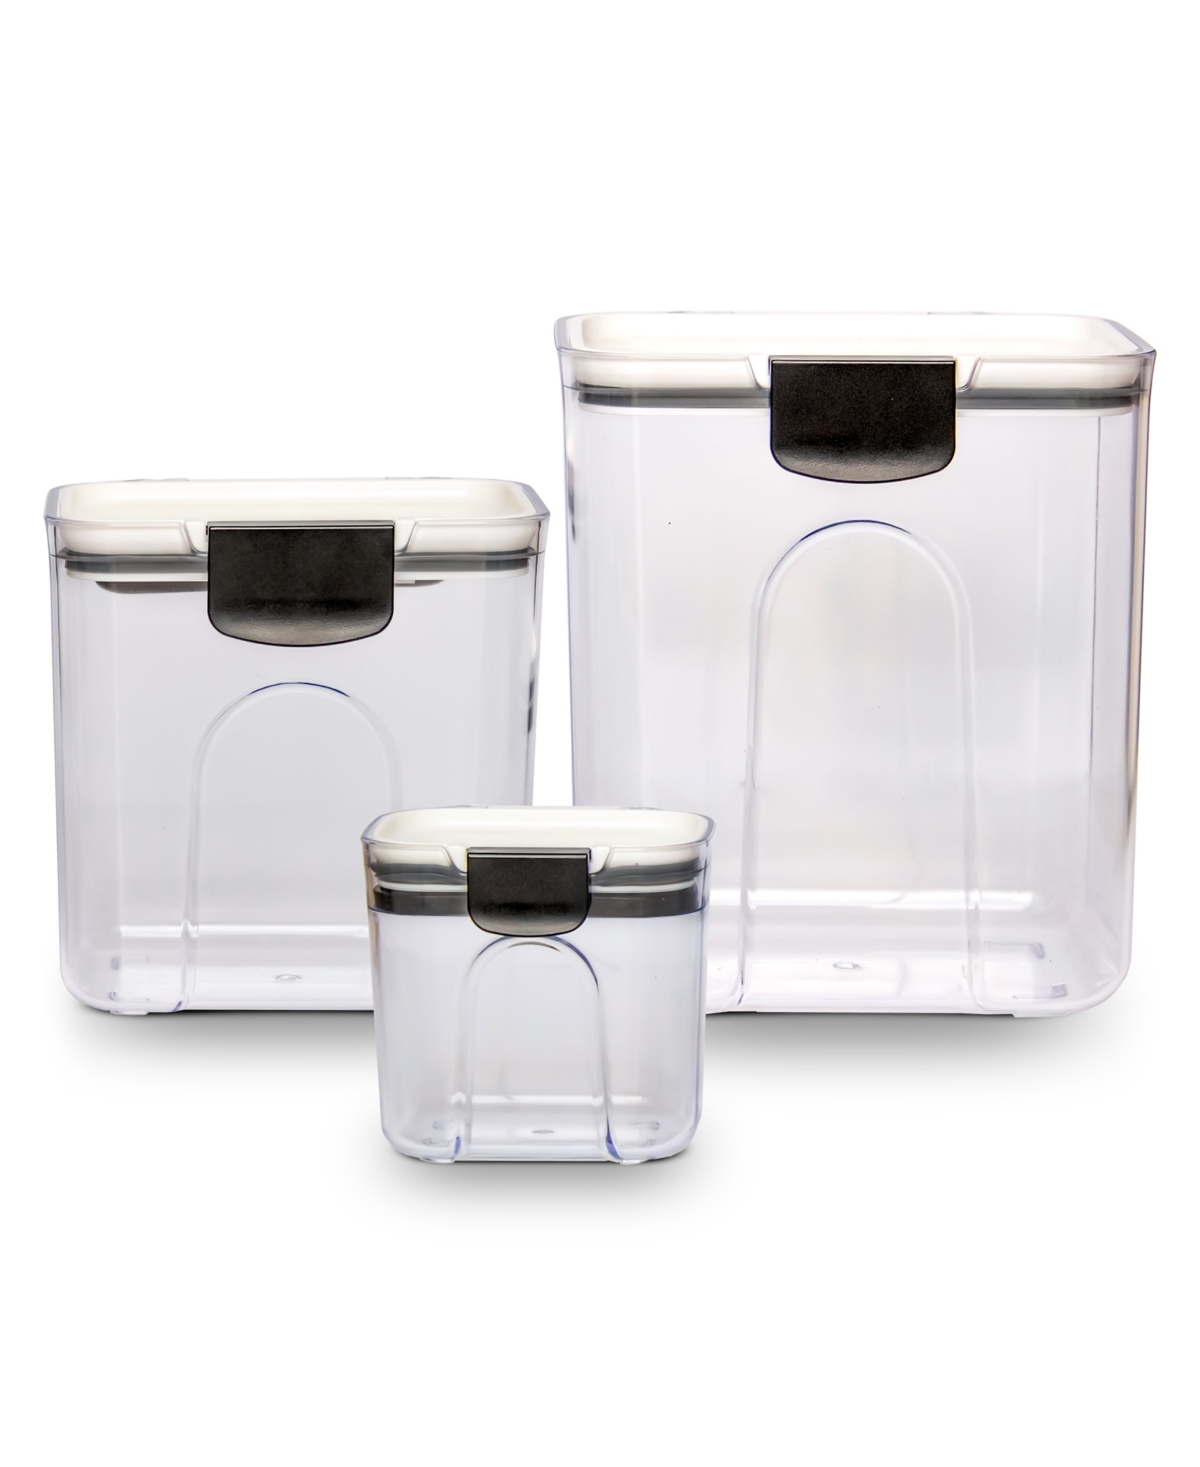 Shop Cheer Collection 3 Piece Set Of Airtight Food Storage Containers In White